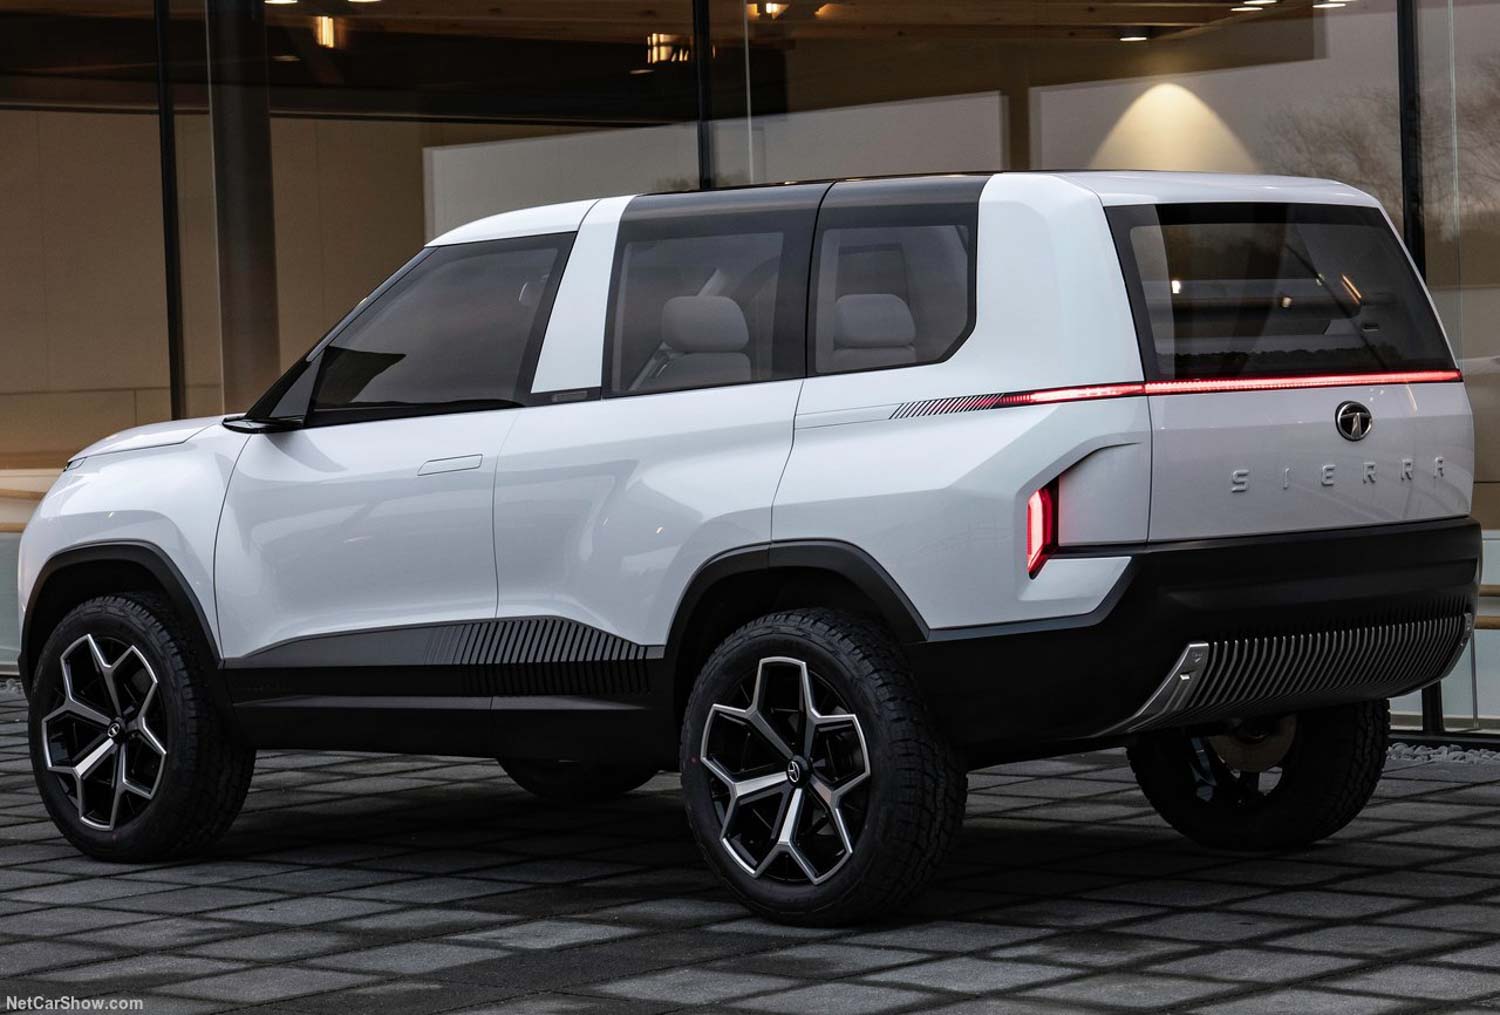 7 Things You Need To Know About The Tata Sierra EV Concept